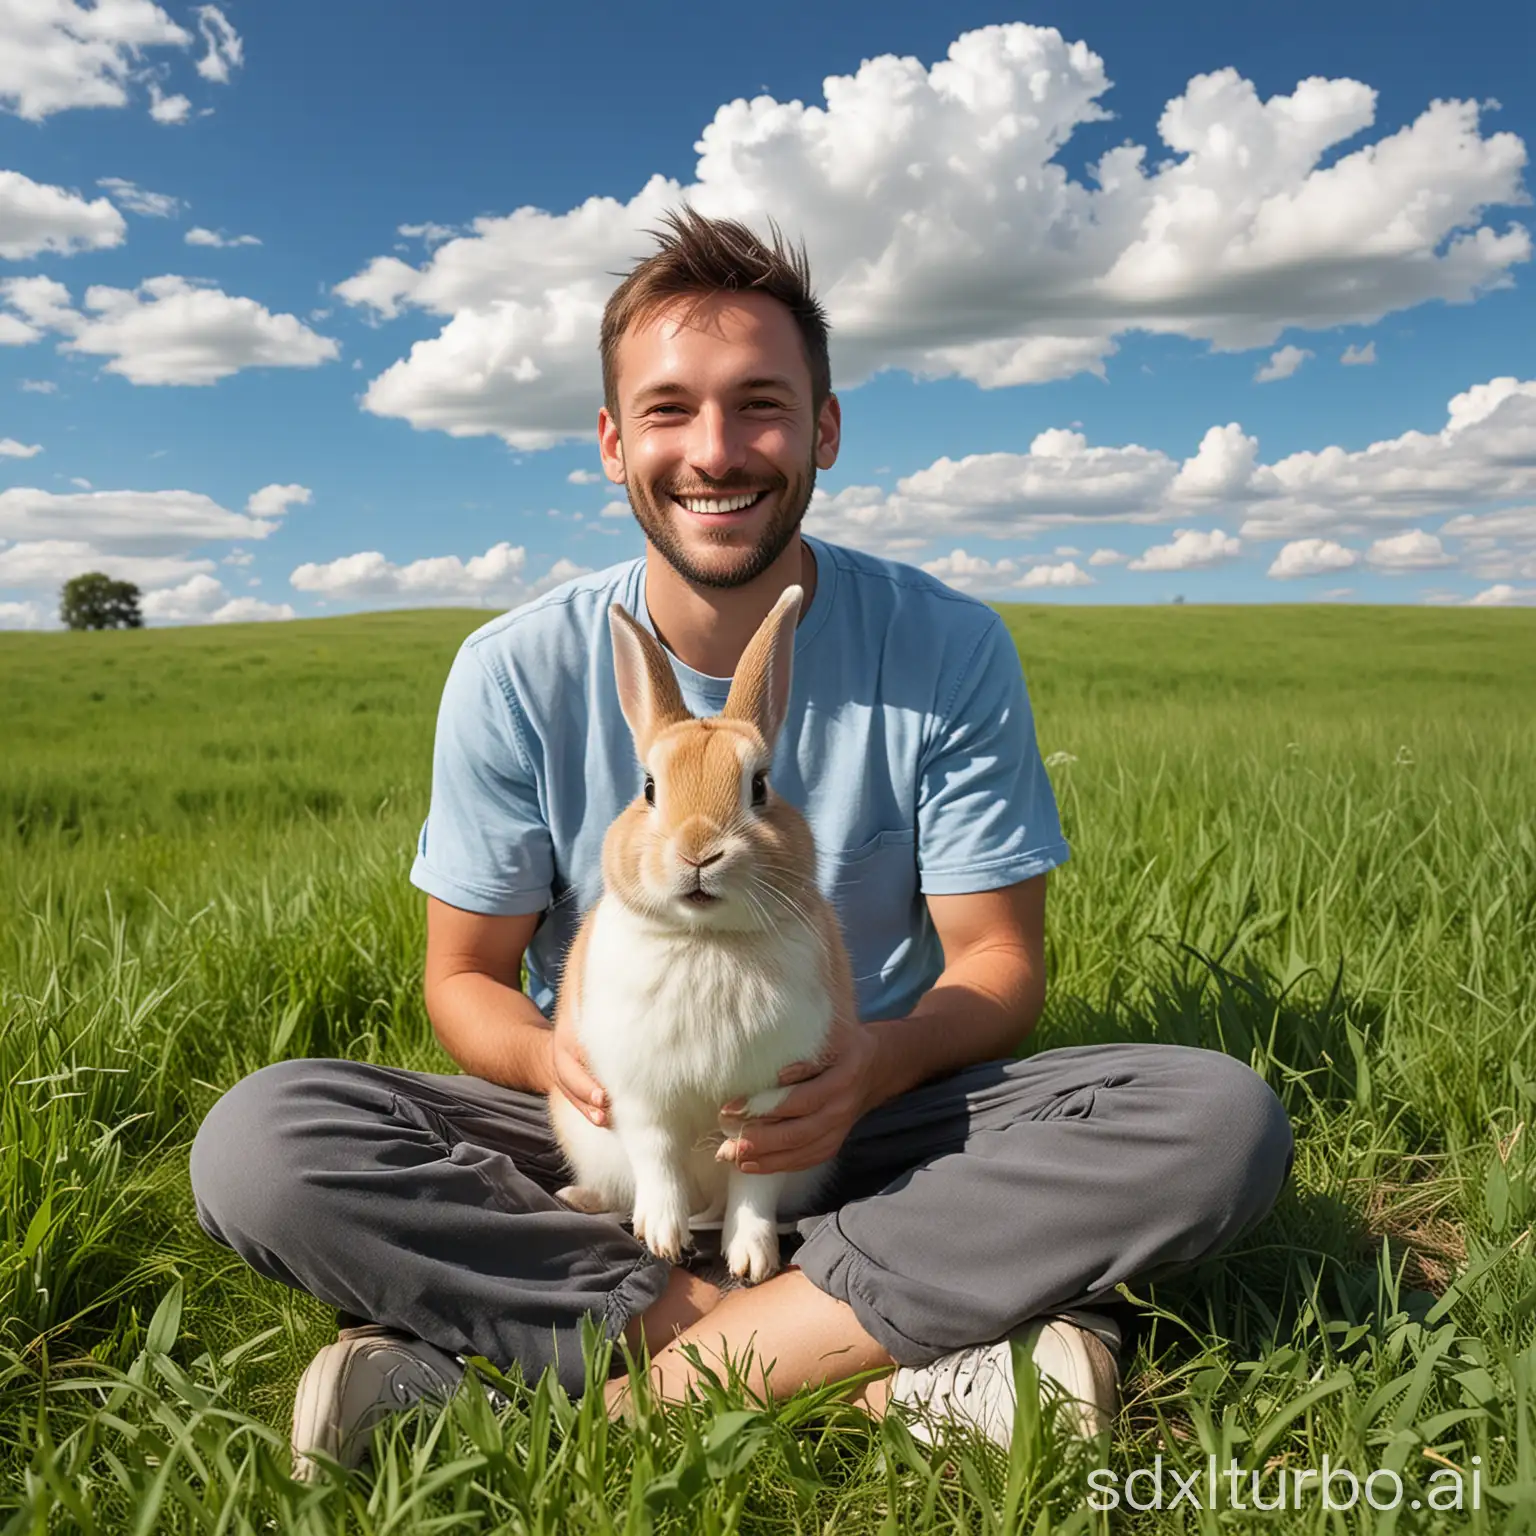 High-resolution photo. A cute rabbit with a human, smiling man's head sitting in a grassy field. The sky is blue with small clouds.